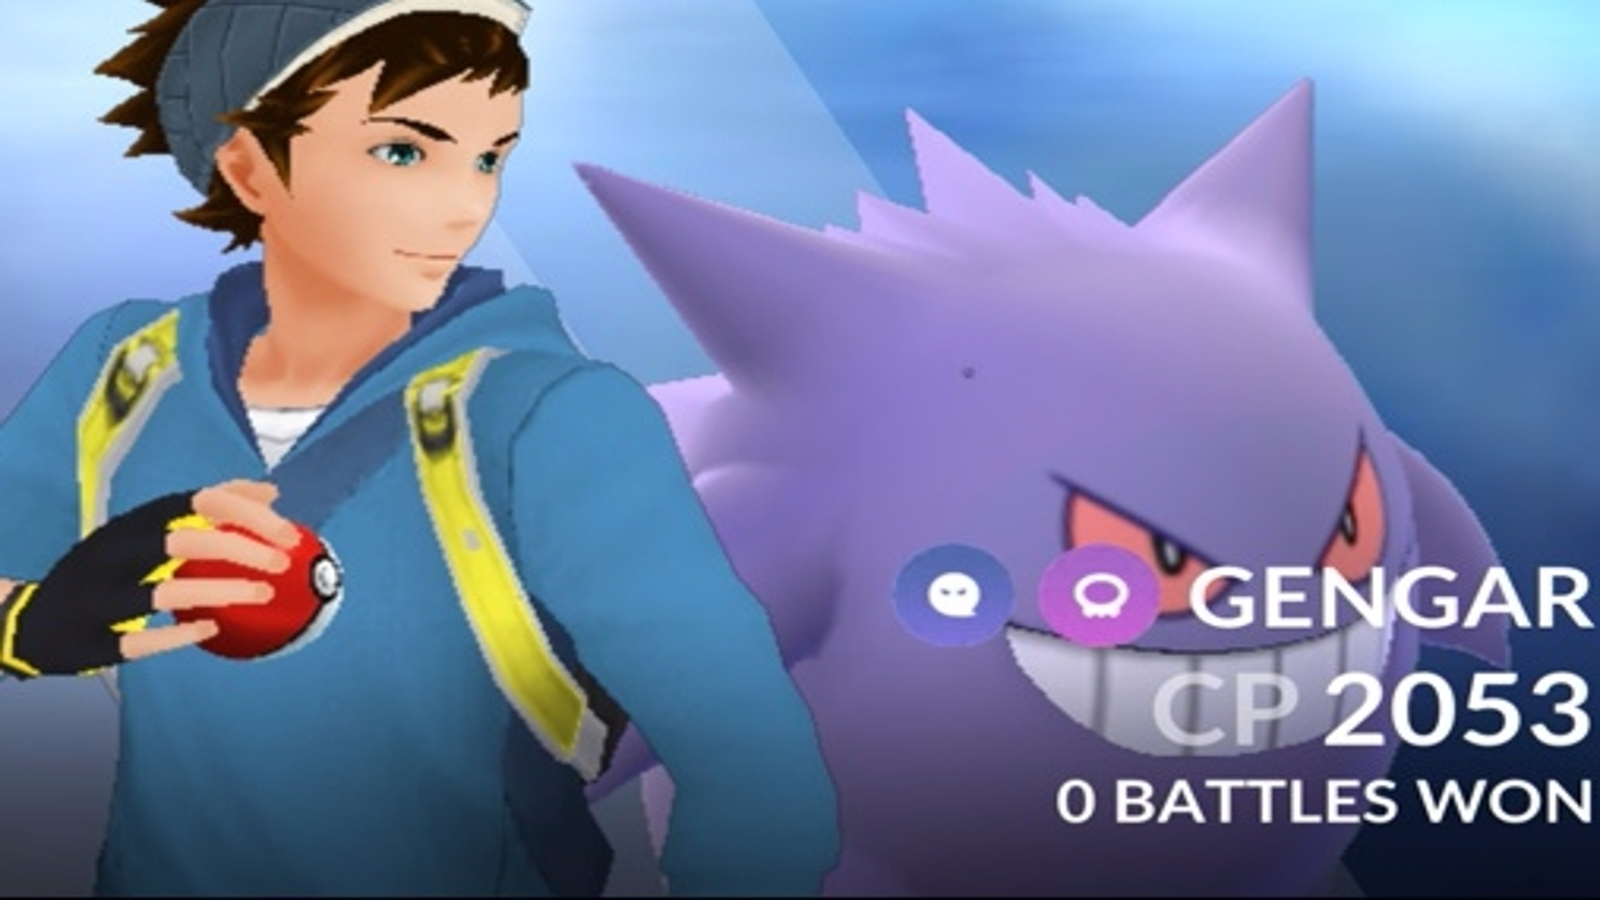 Pokémon GO on X: Trainers, check out this video for a quick